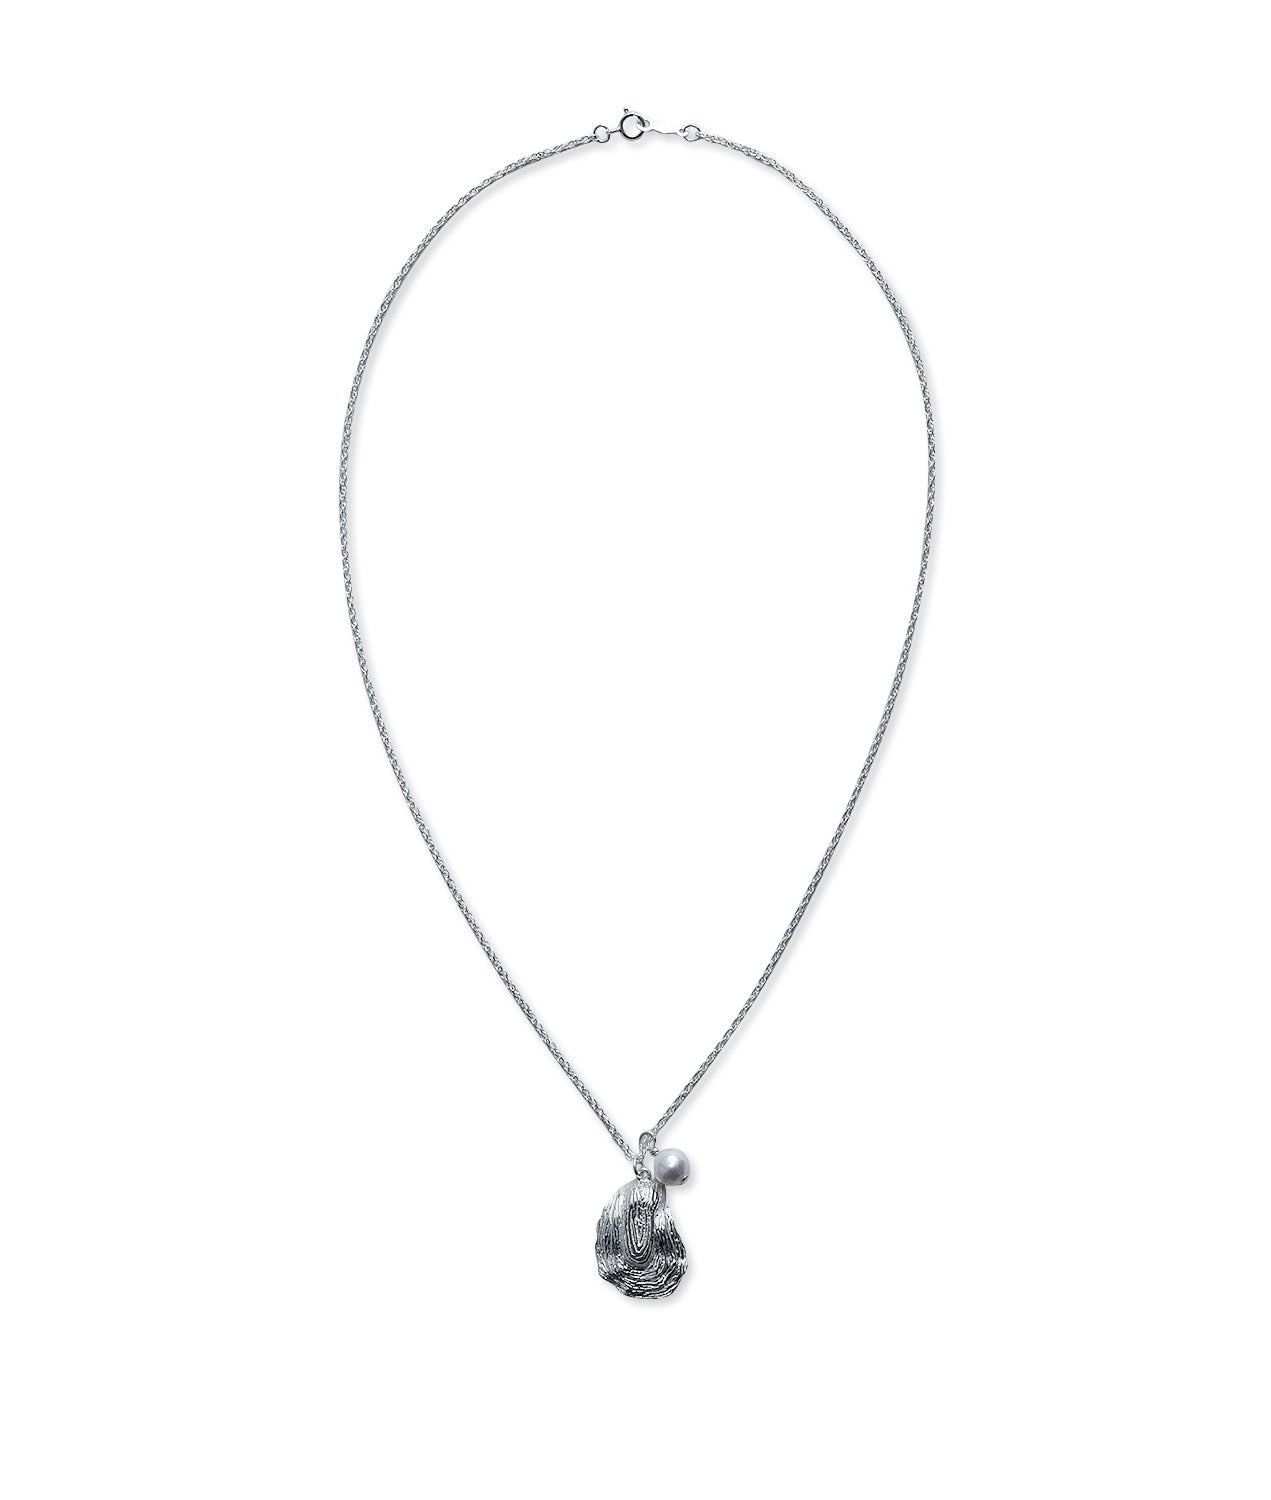 Shem Necklace in Silver